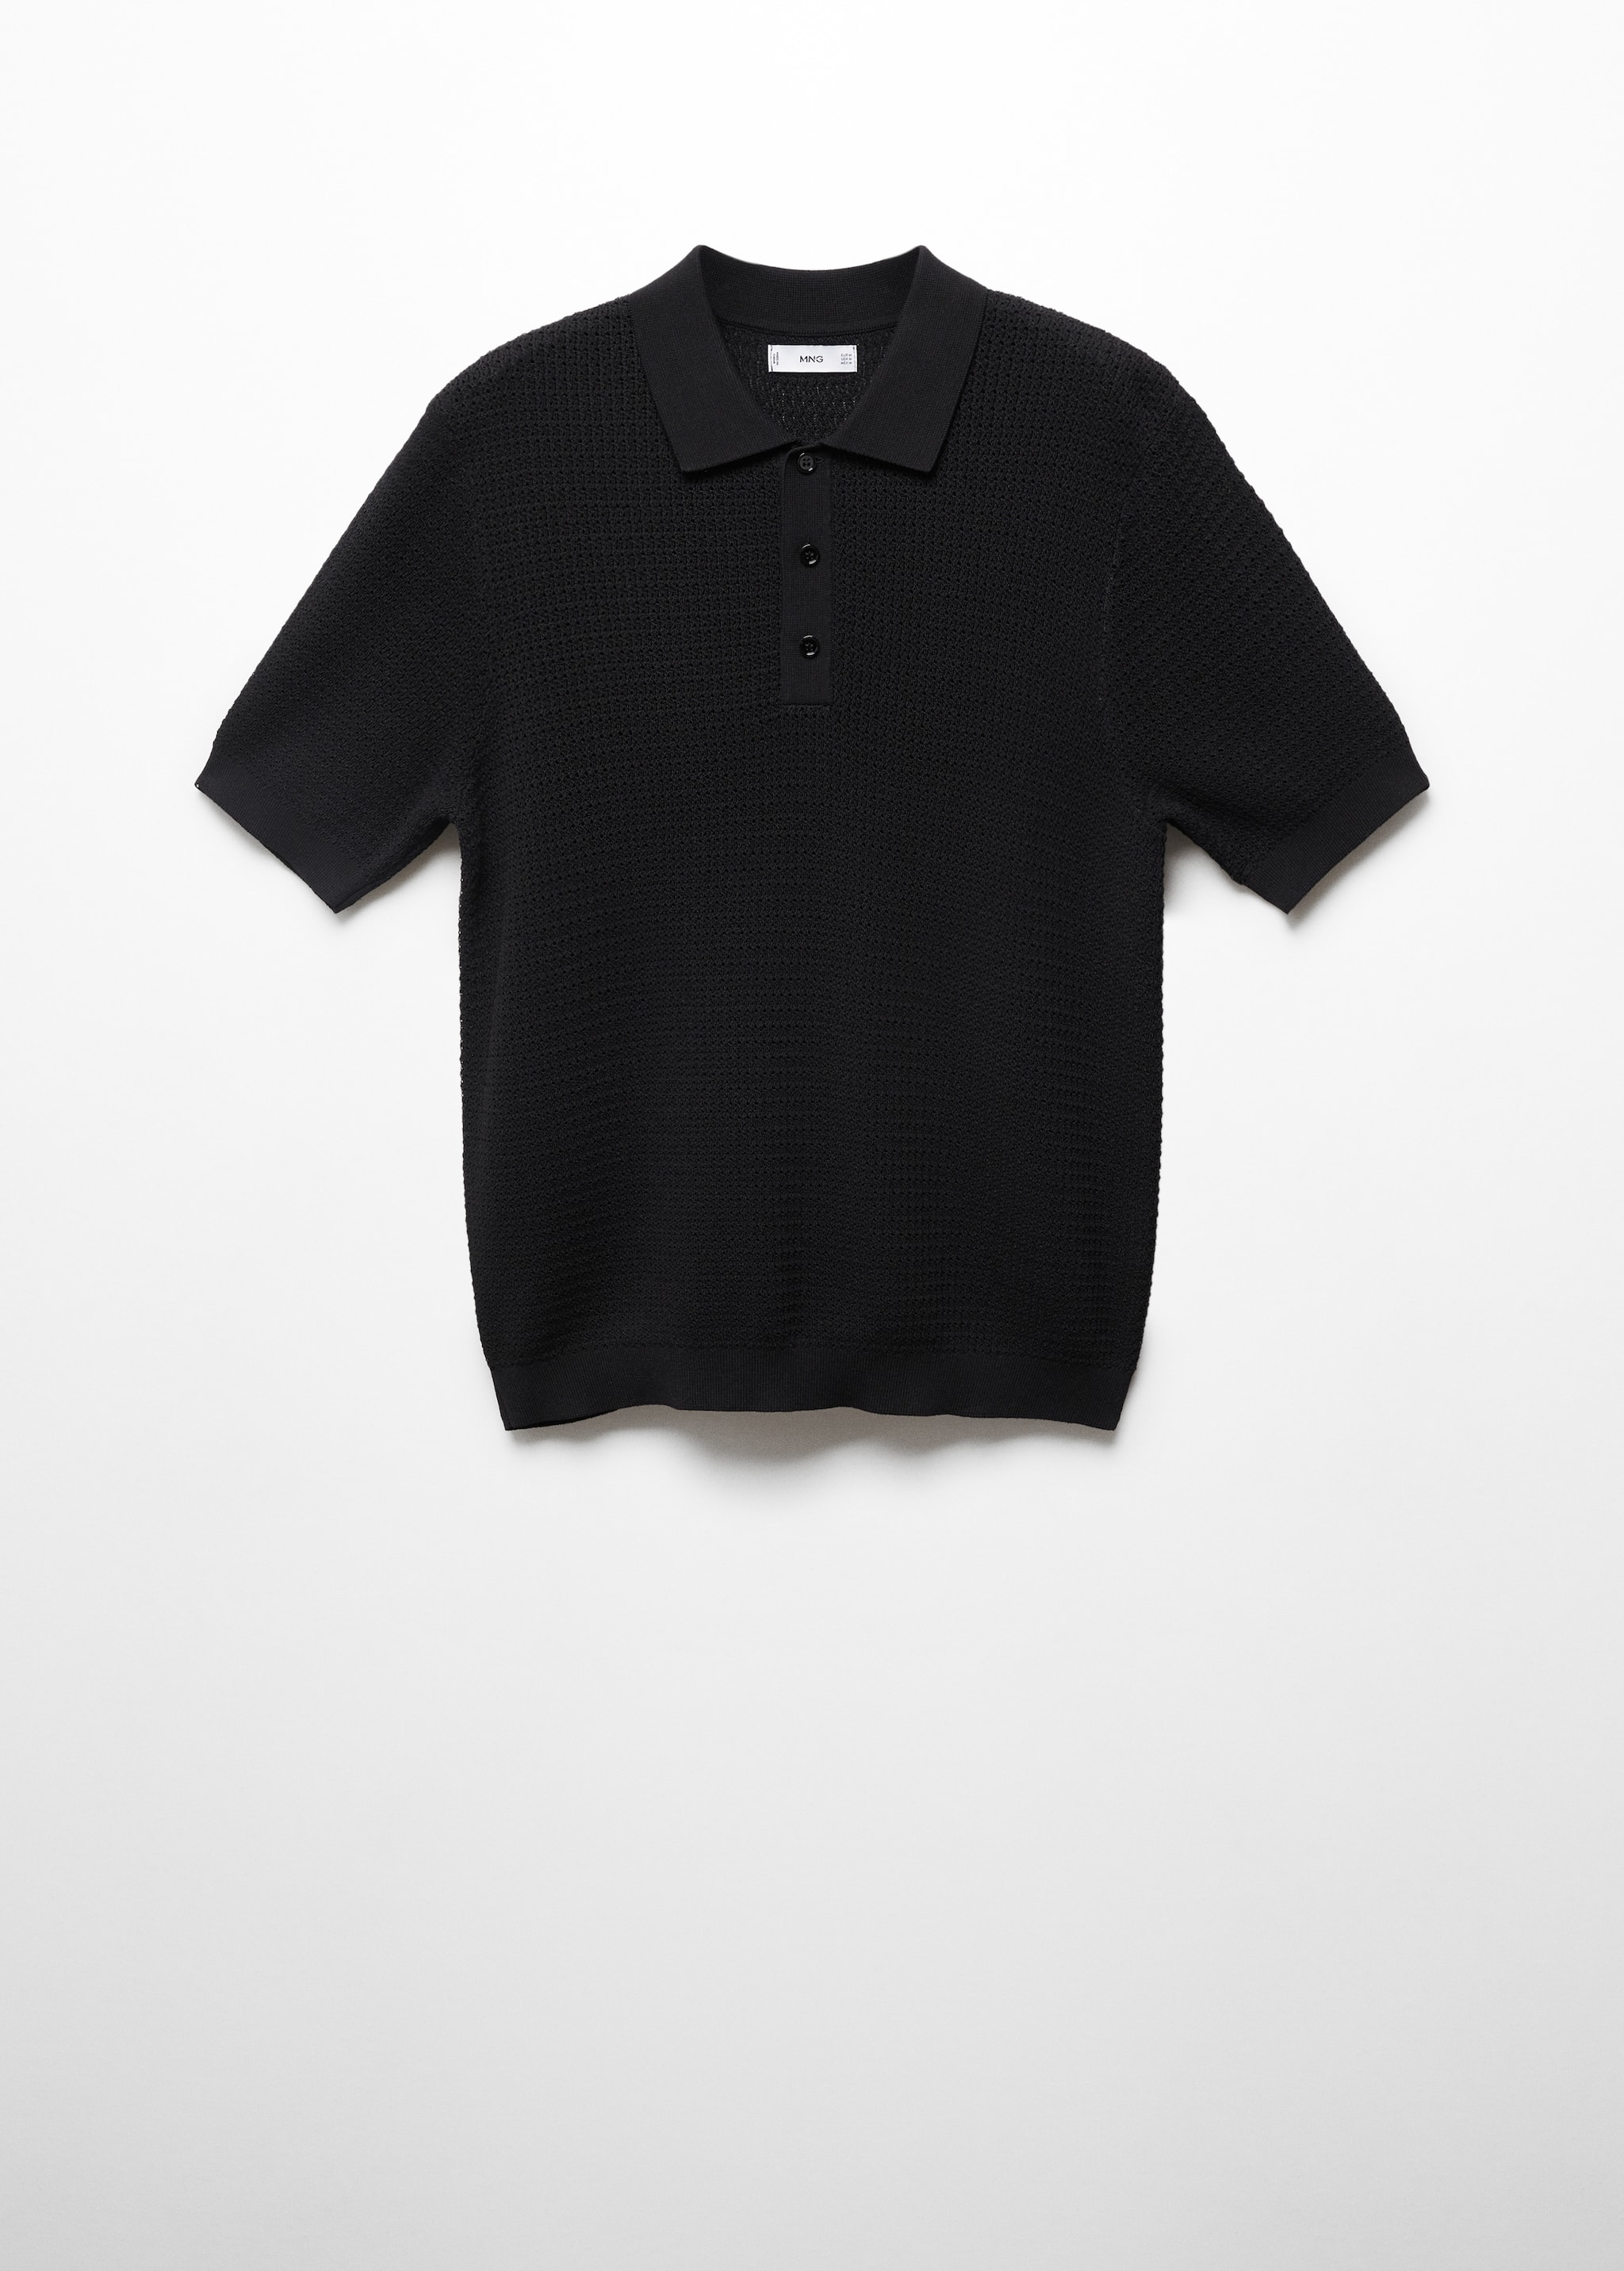 Openwork knit polo - Article without model